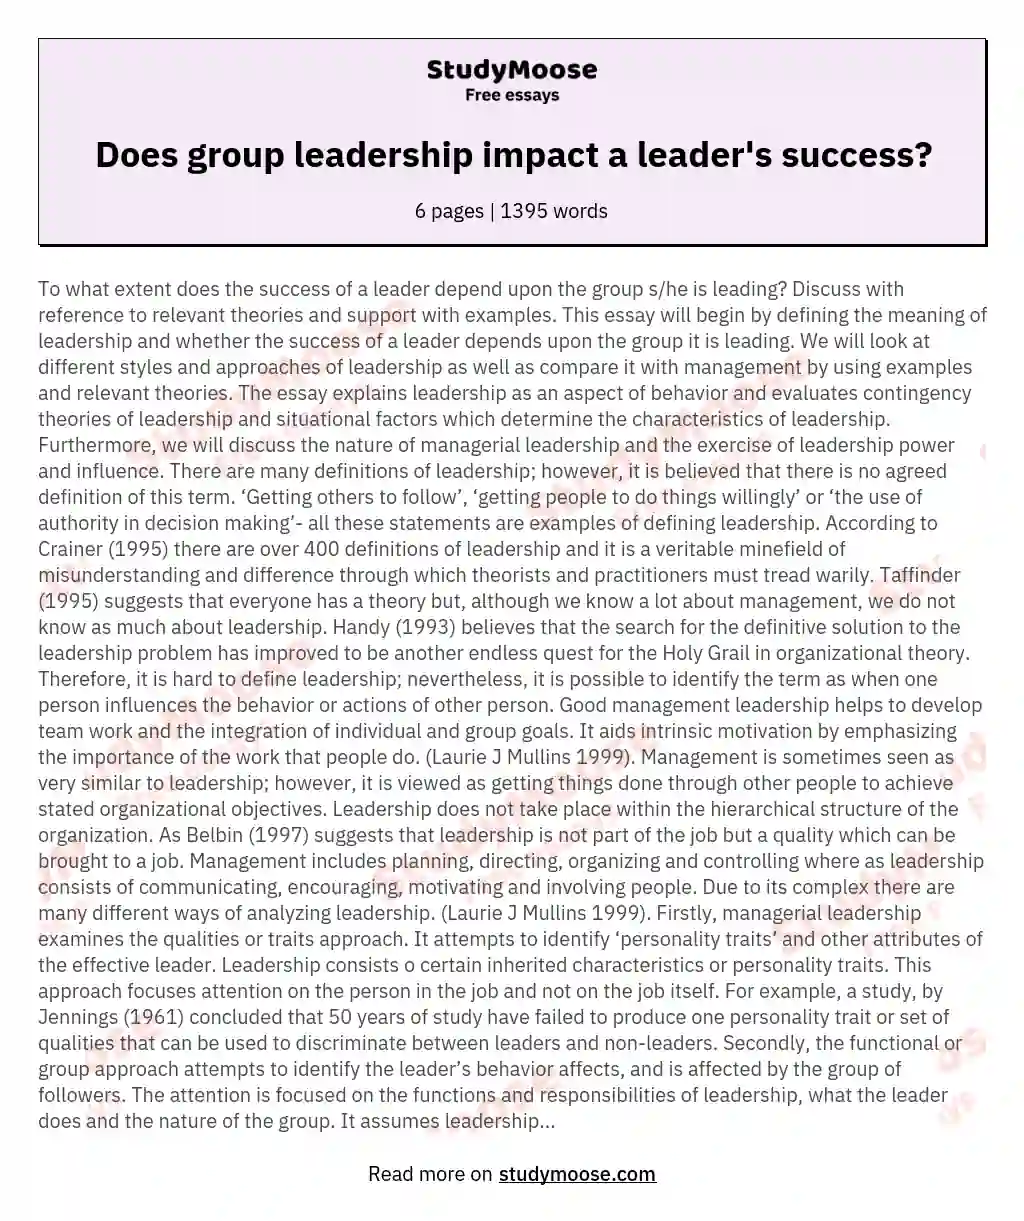 Does group leadership impact a leader's success? essay